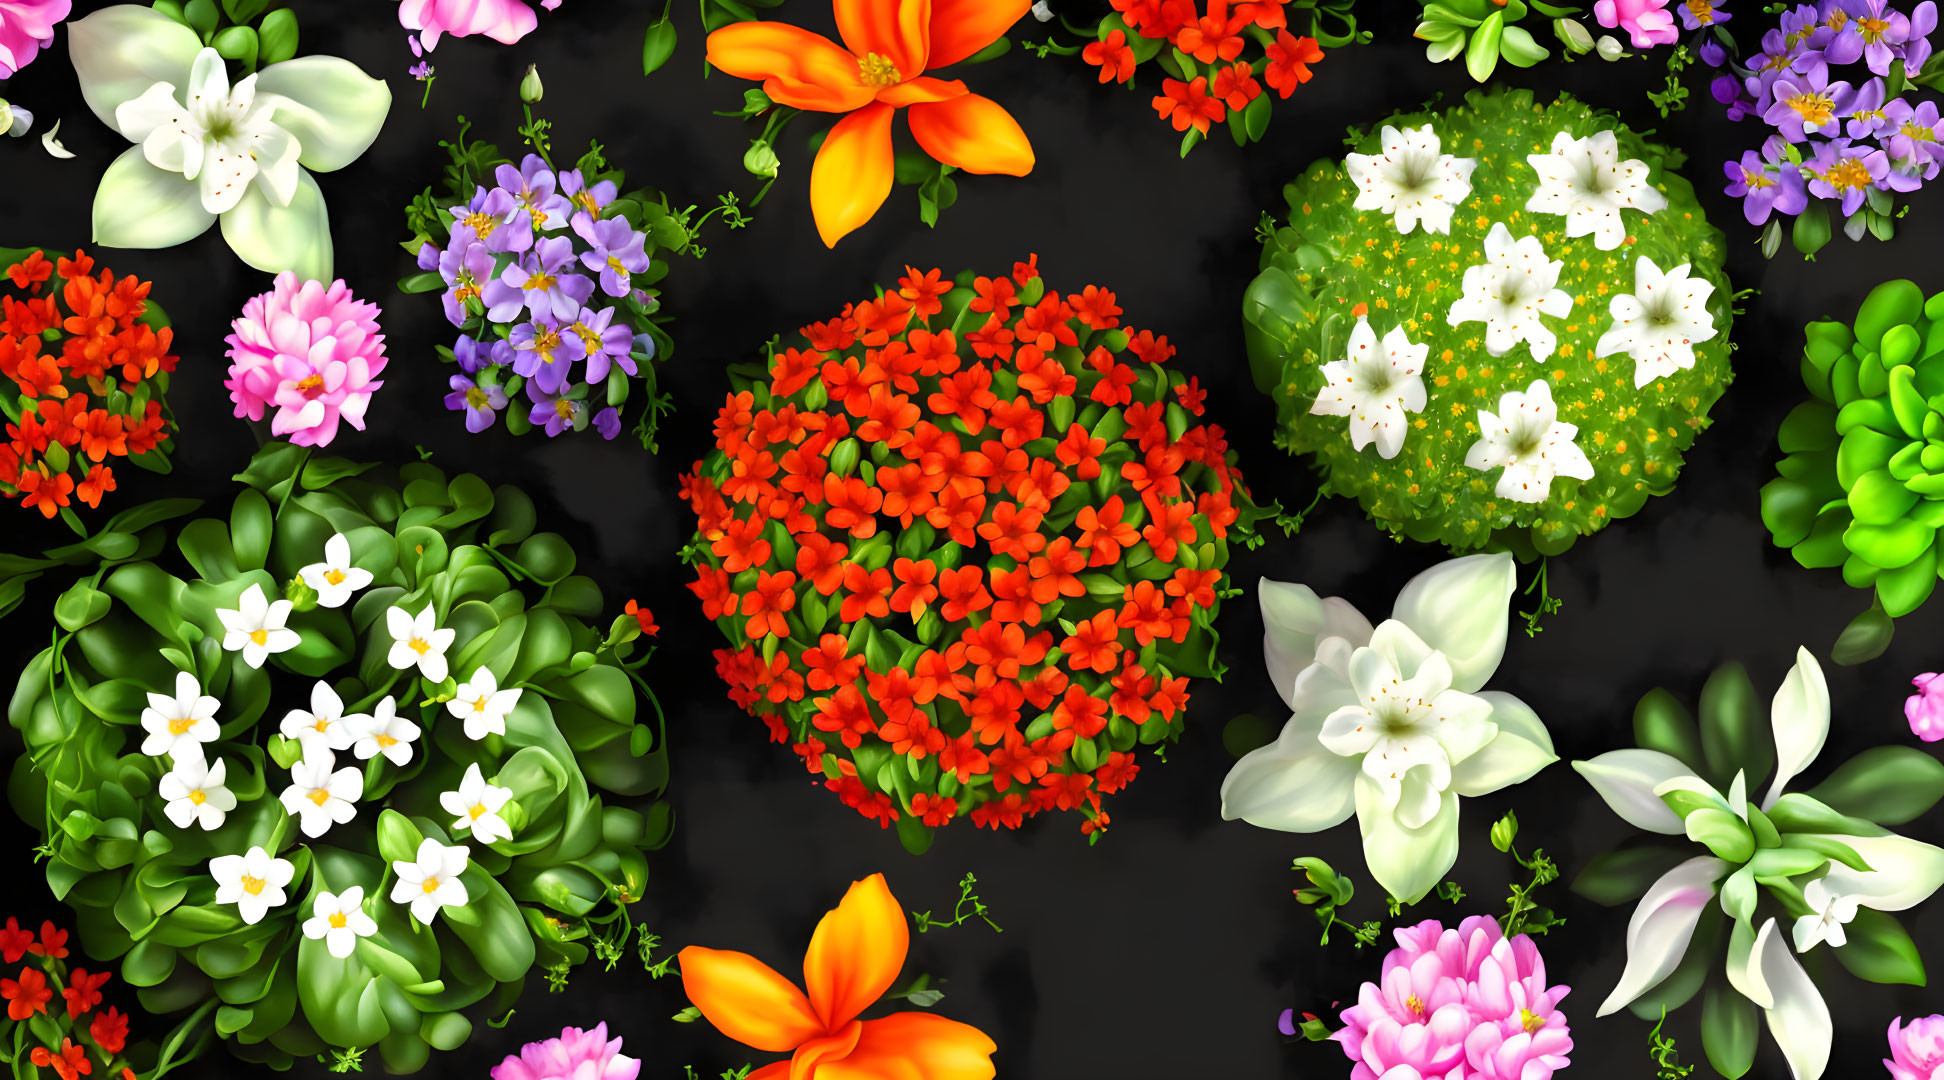 Colorful Flower Clusters on Dark Background: Detailed and Vibrant Blooms